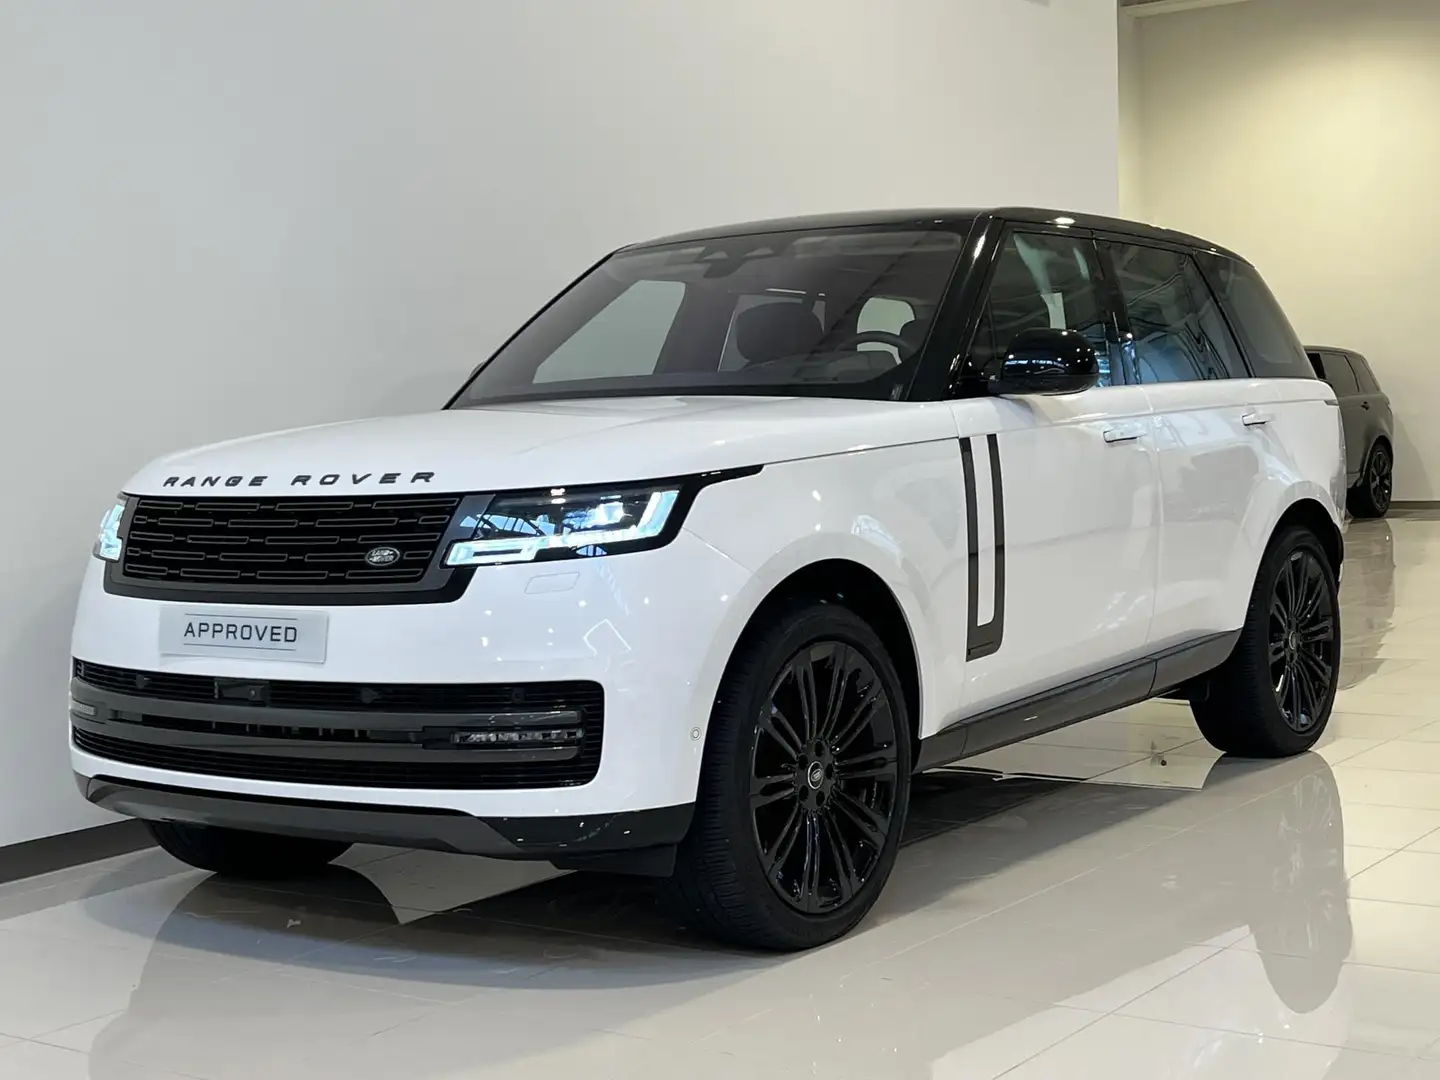 Land Rover Range Rover D350 Autobiography MHEV | 23 inch Gloss Black | Pa White - 2